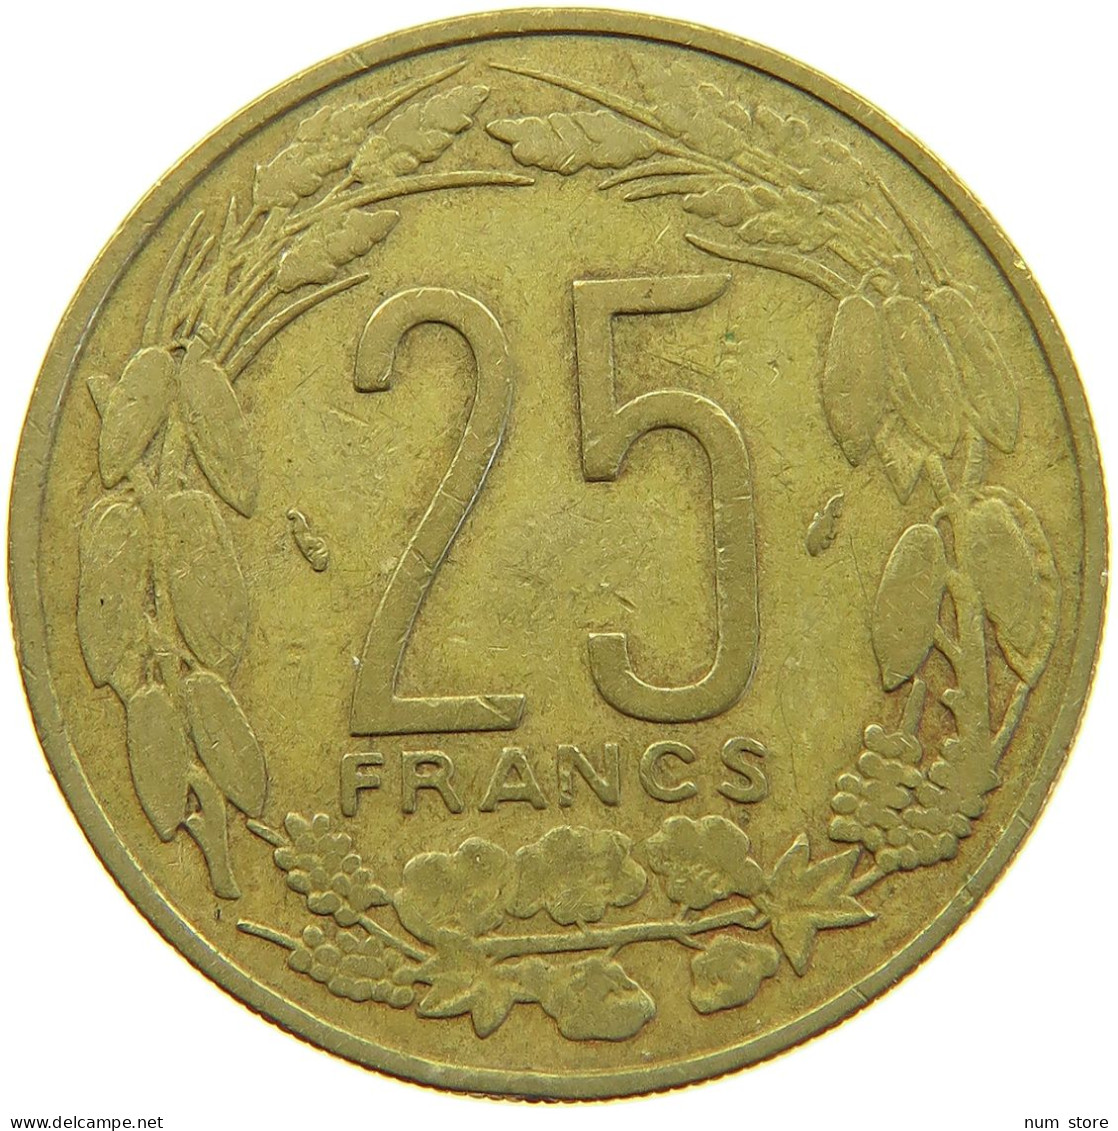 CENTRAL AFRICAN STATES 25 FRANCS 1983  #c067 0285 - Centraal-Afrikaanse Republiek